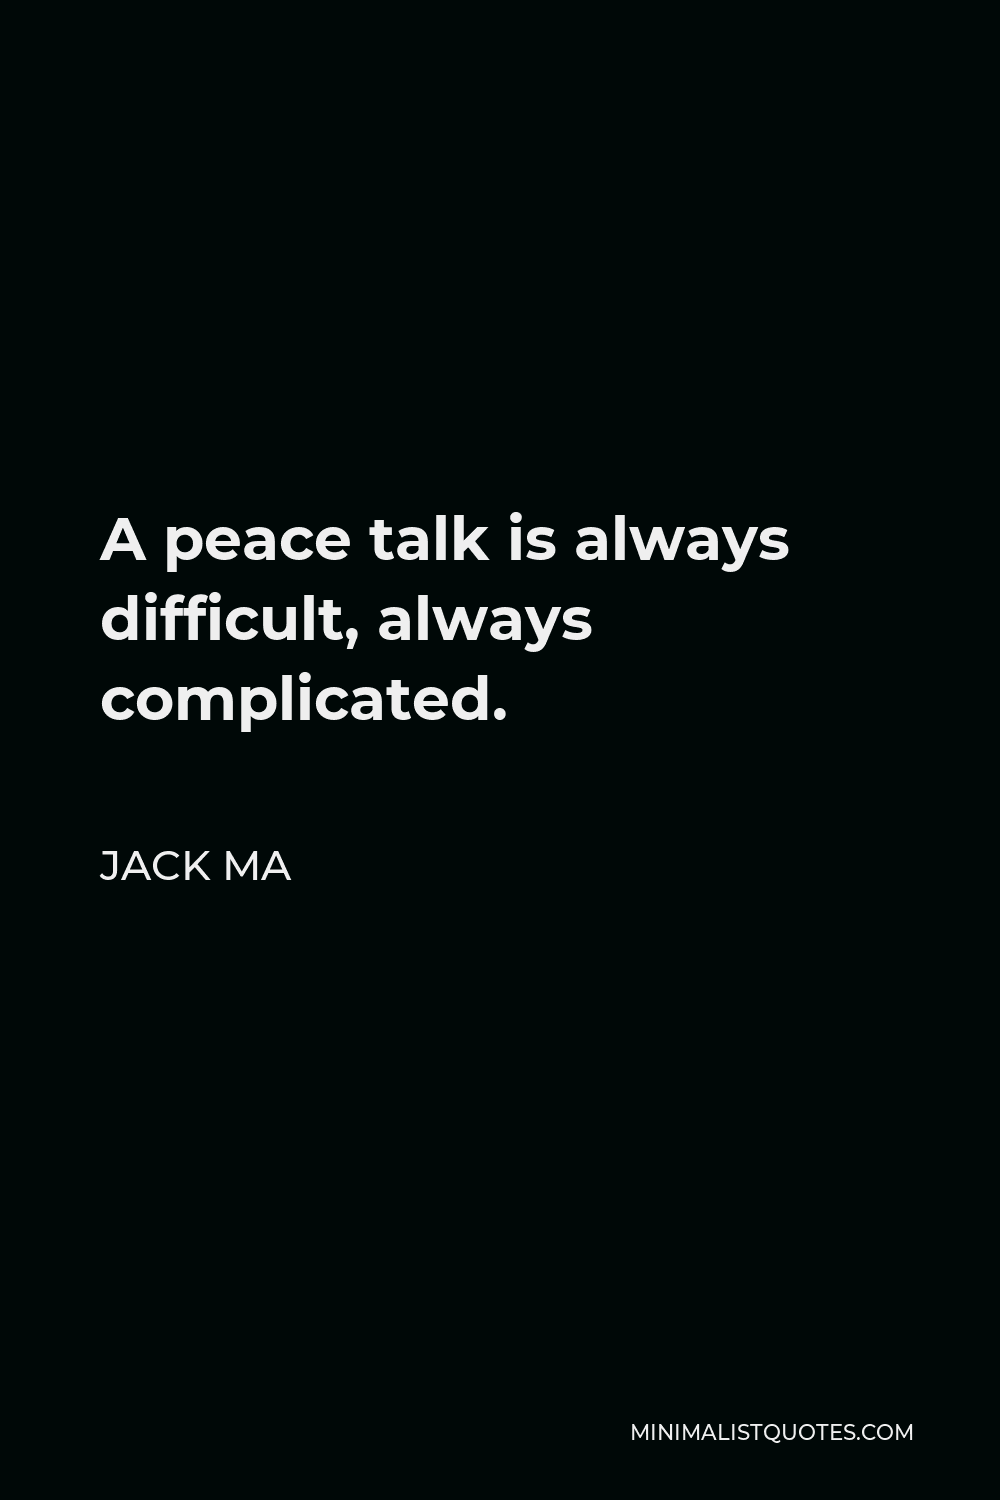 Jack Ma Quote - A peace talk is always difficult, always complicated.